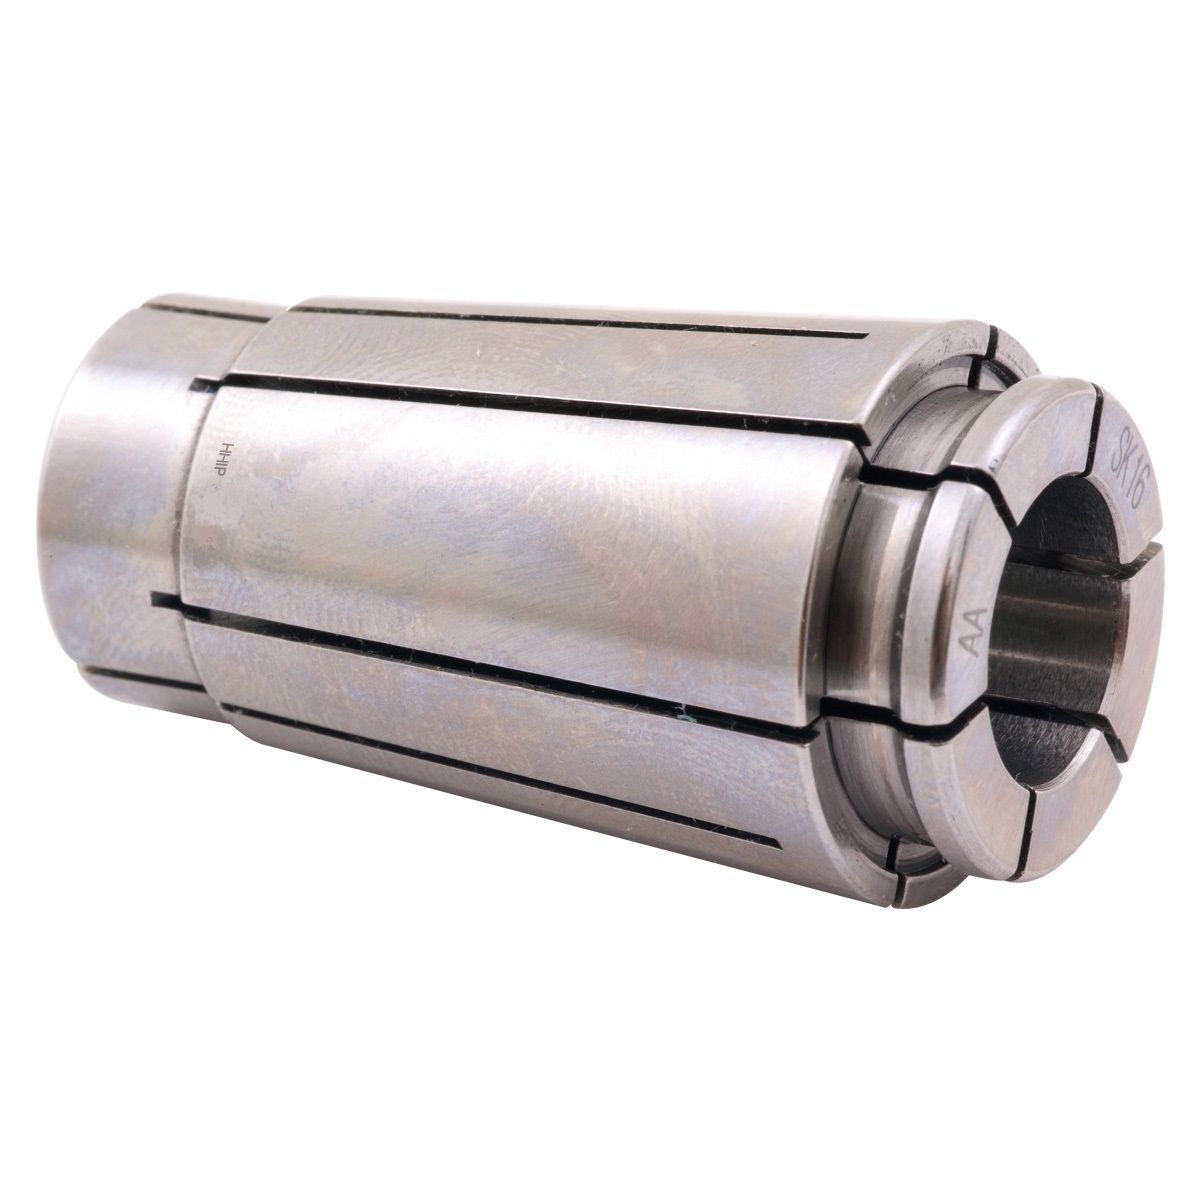 PRO-SERIES 9/16" SK16 LYNDEX STYLE COLLET (3901-5460)